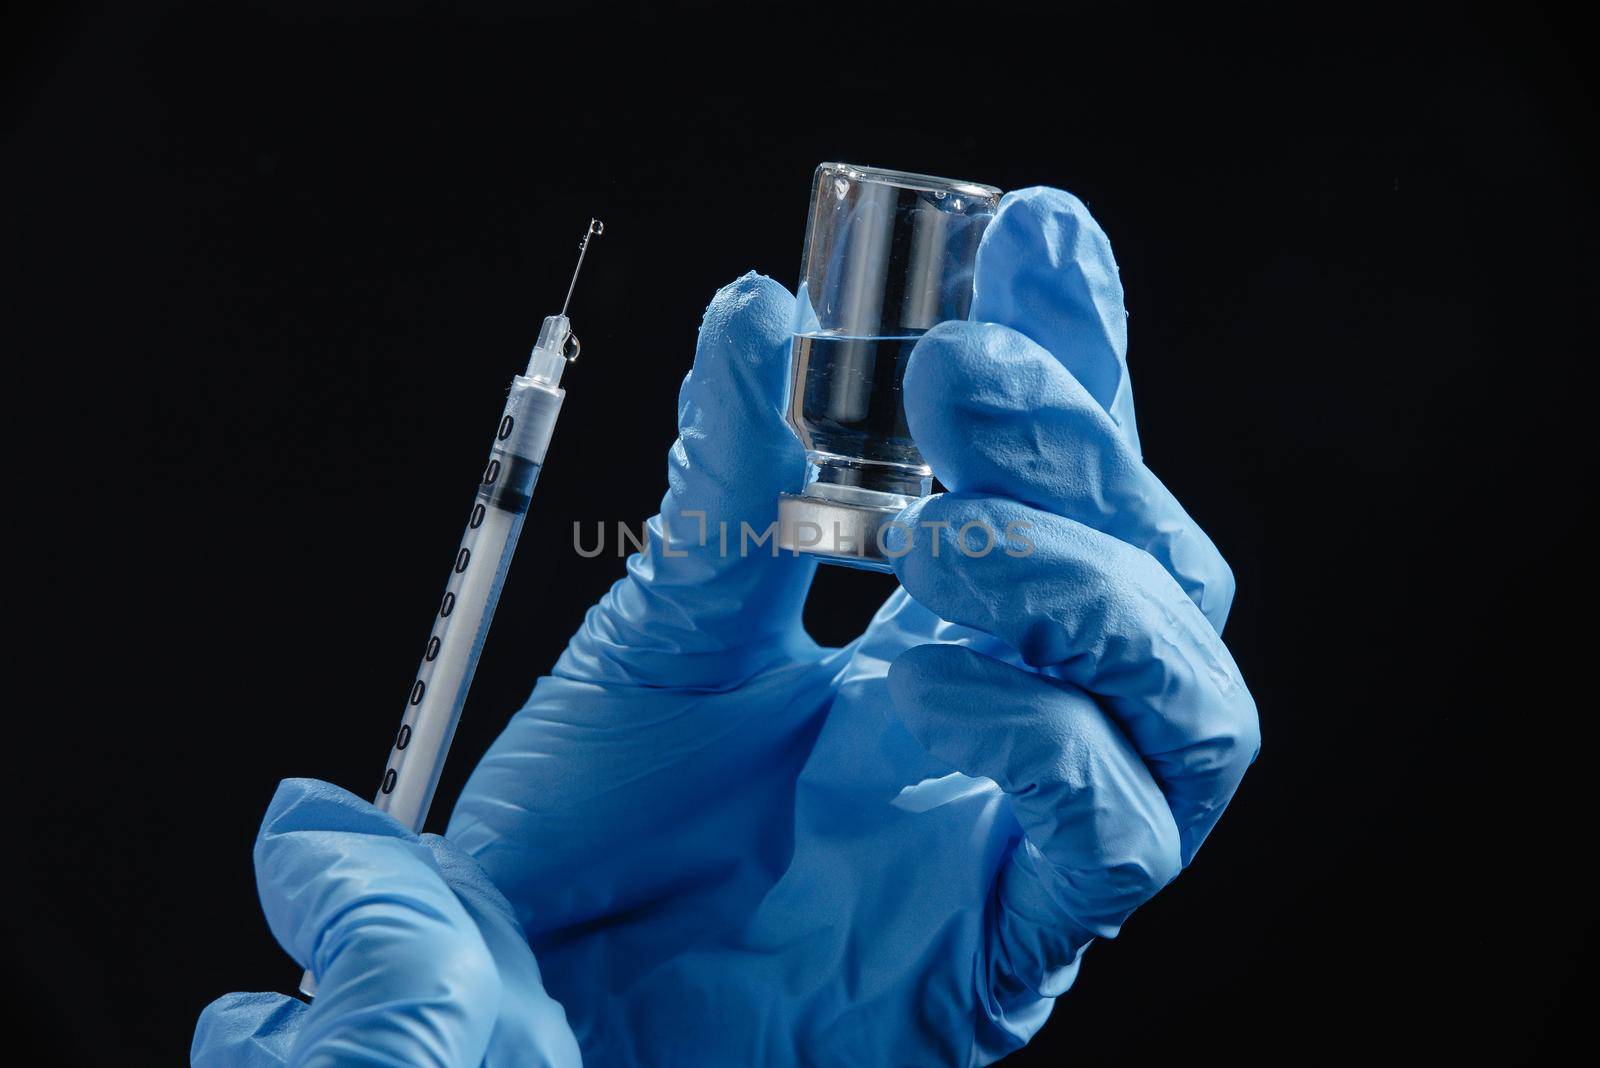 the doctor's hands hold a syringe of liquid vaccine against a black background. A doctor or scientist in the COVID-19 medical vaccine research and development laboratory holds a syringe with a liquid vaccine to study and analyze antibody samples for the patient